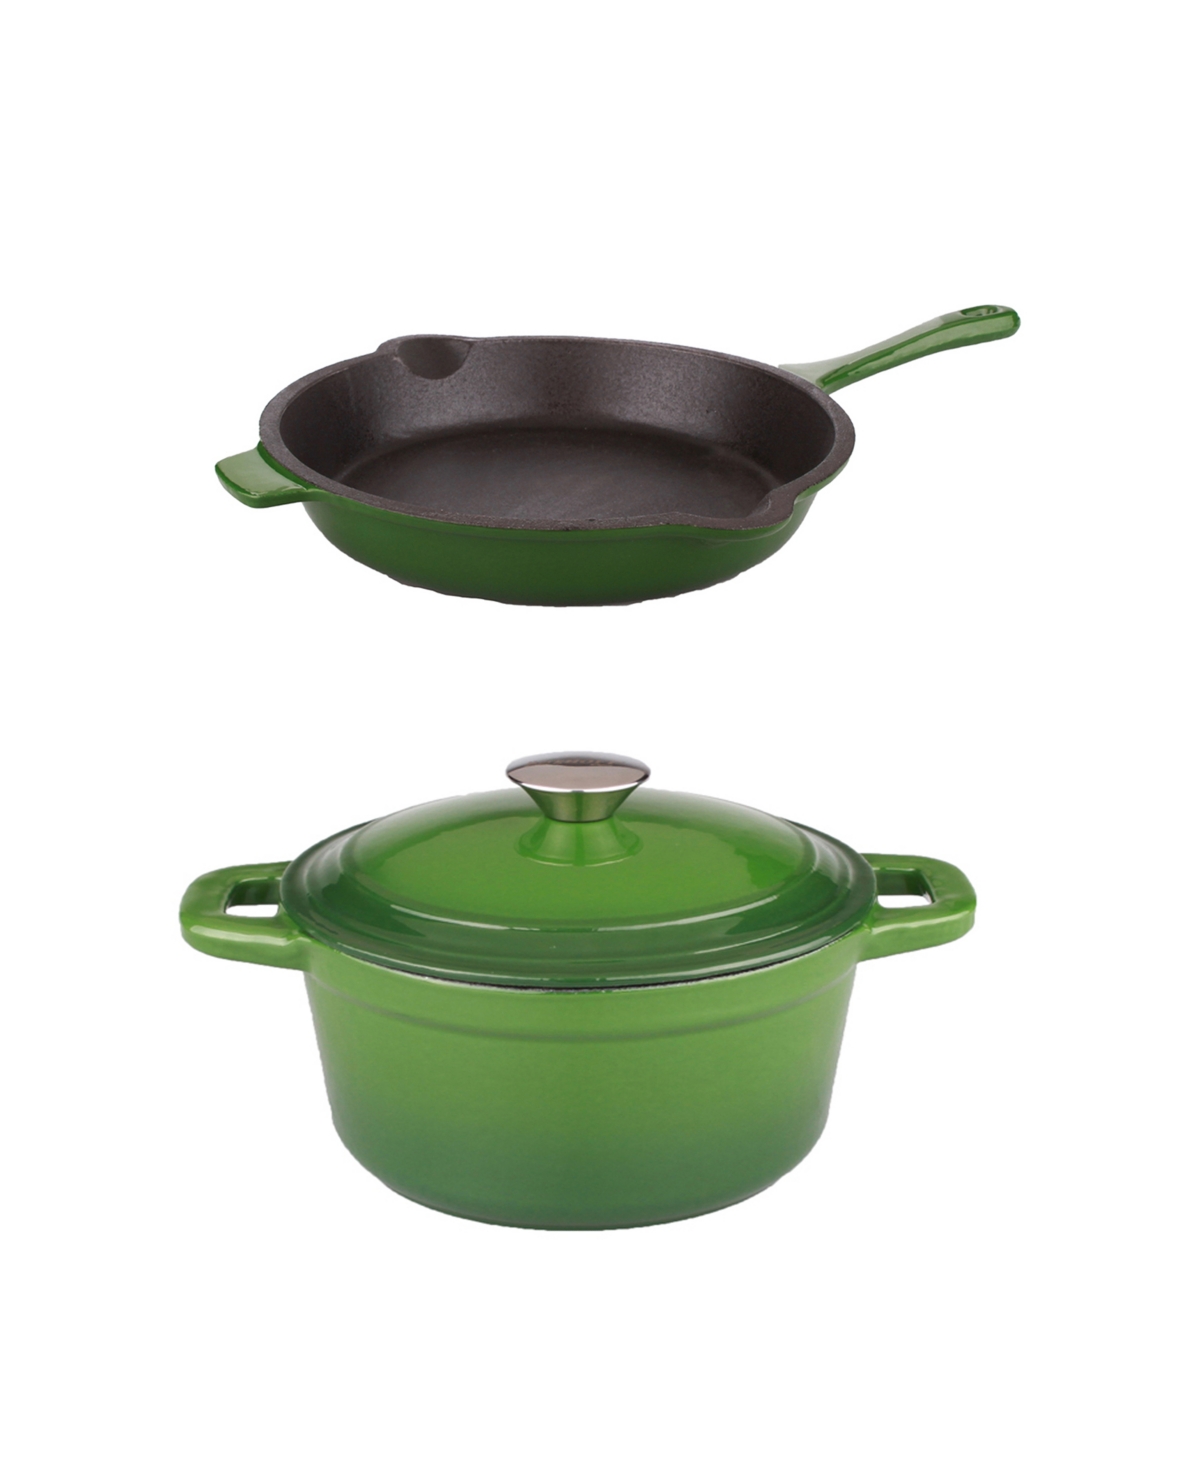 Neo Cast Iron Cookware 3 Quart Covered Dutch Oven and 10 Fry Pan, Set of 2